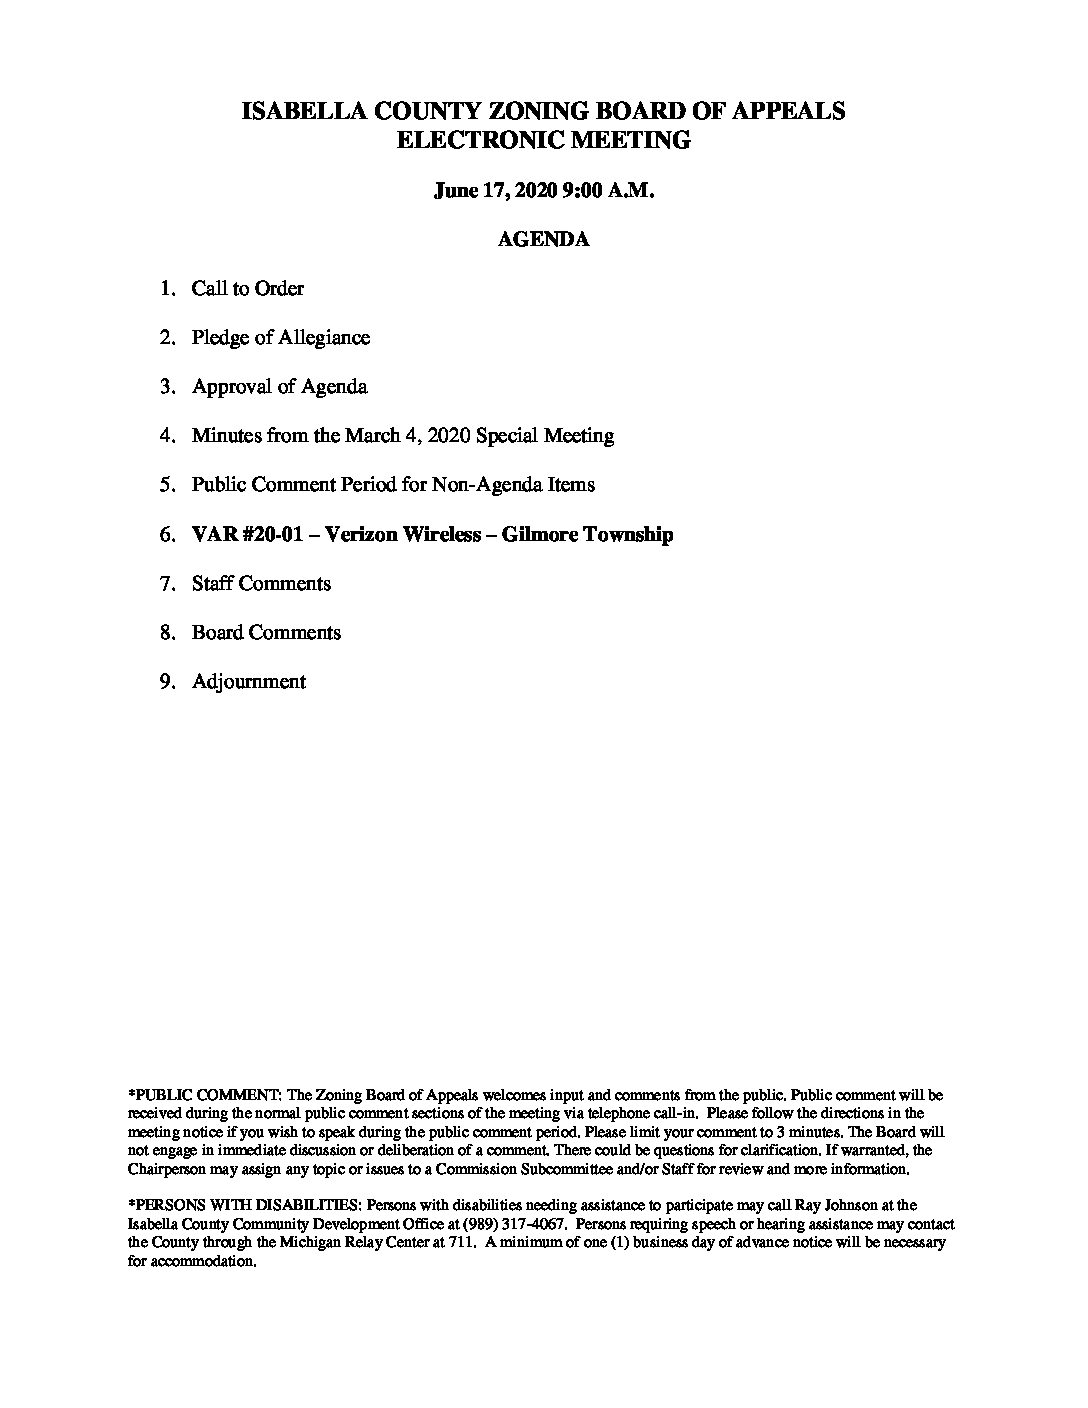 preview image of first page June 17, 2020 Agenda